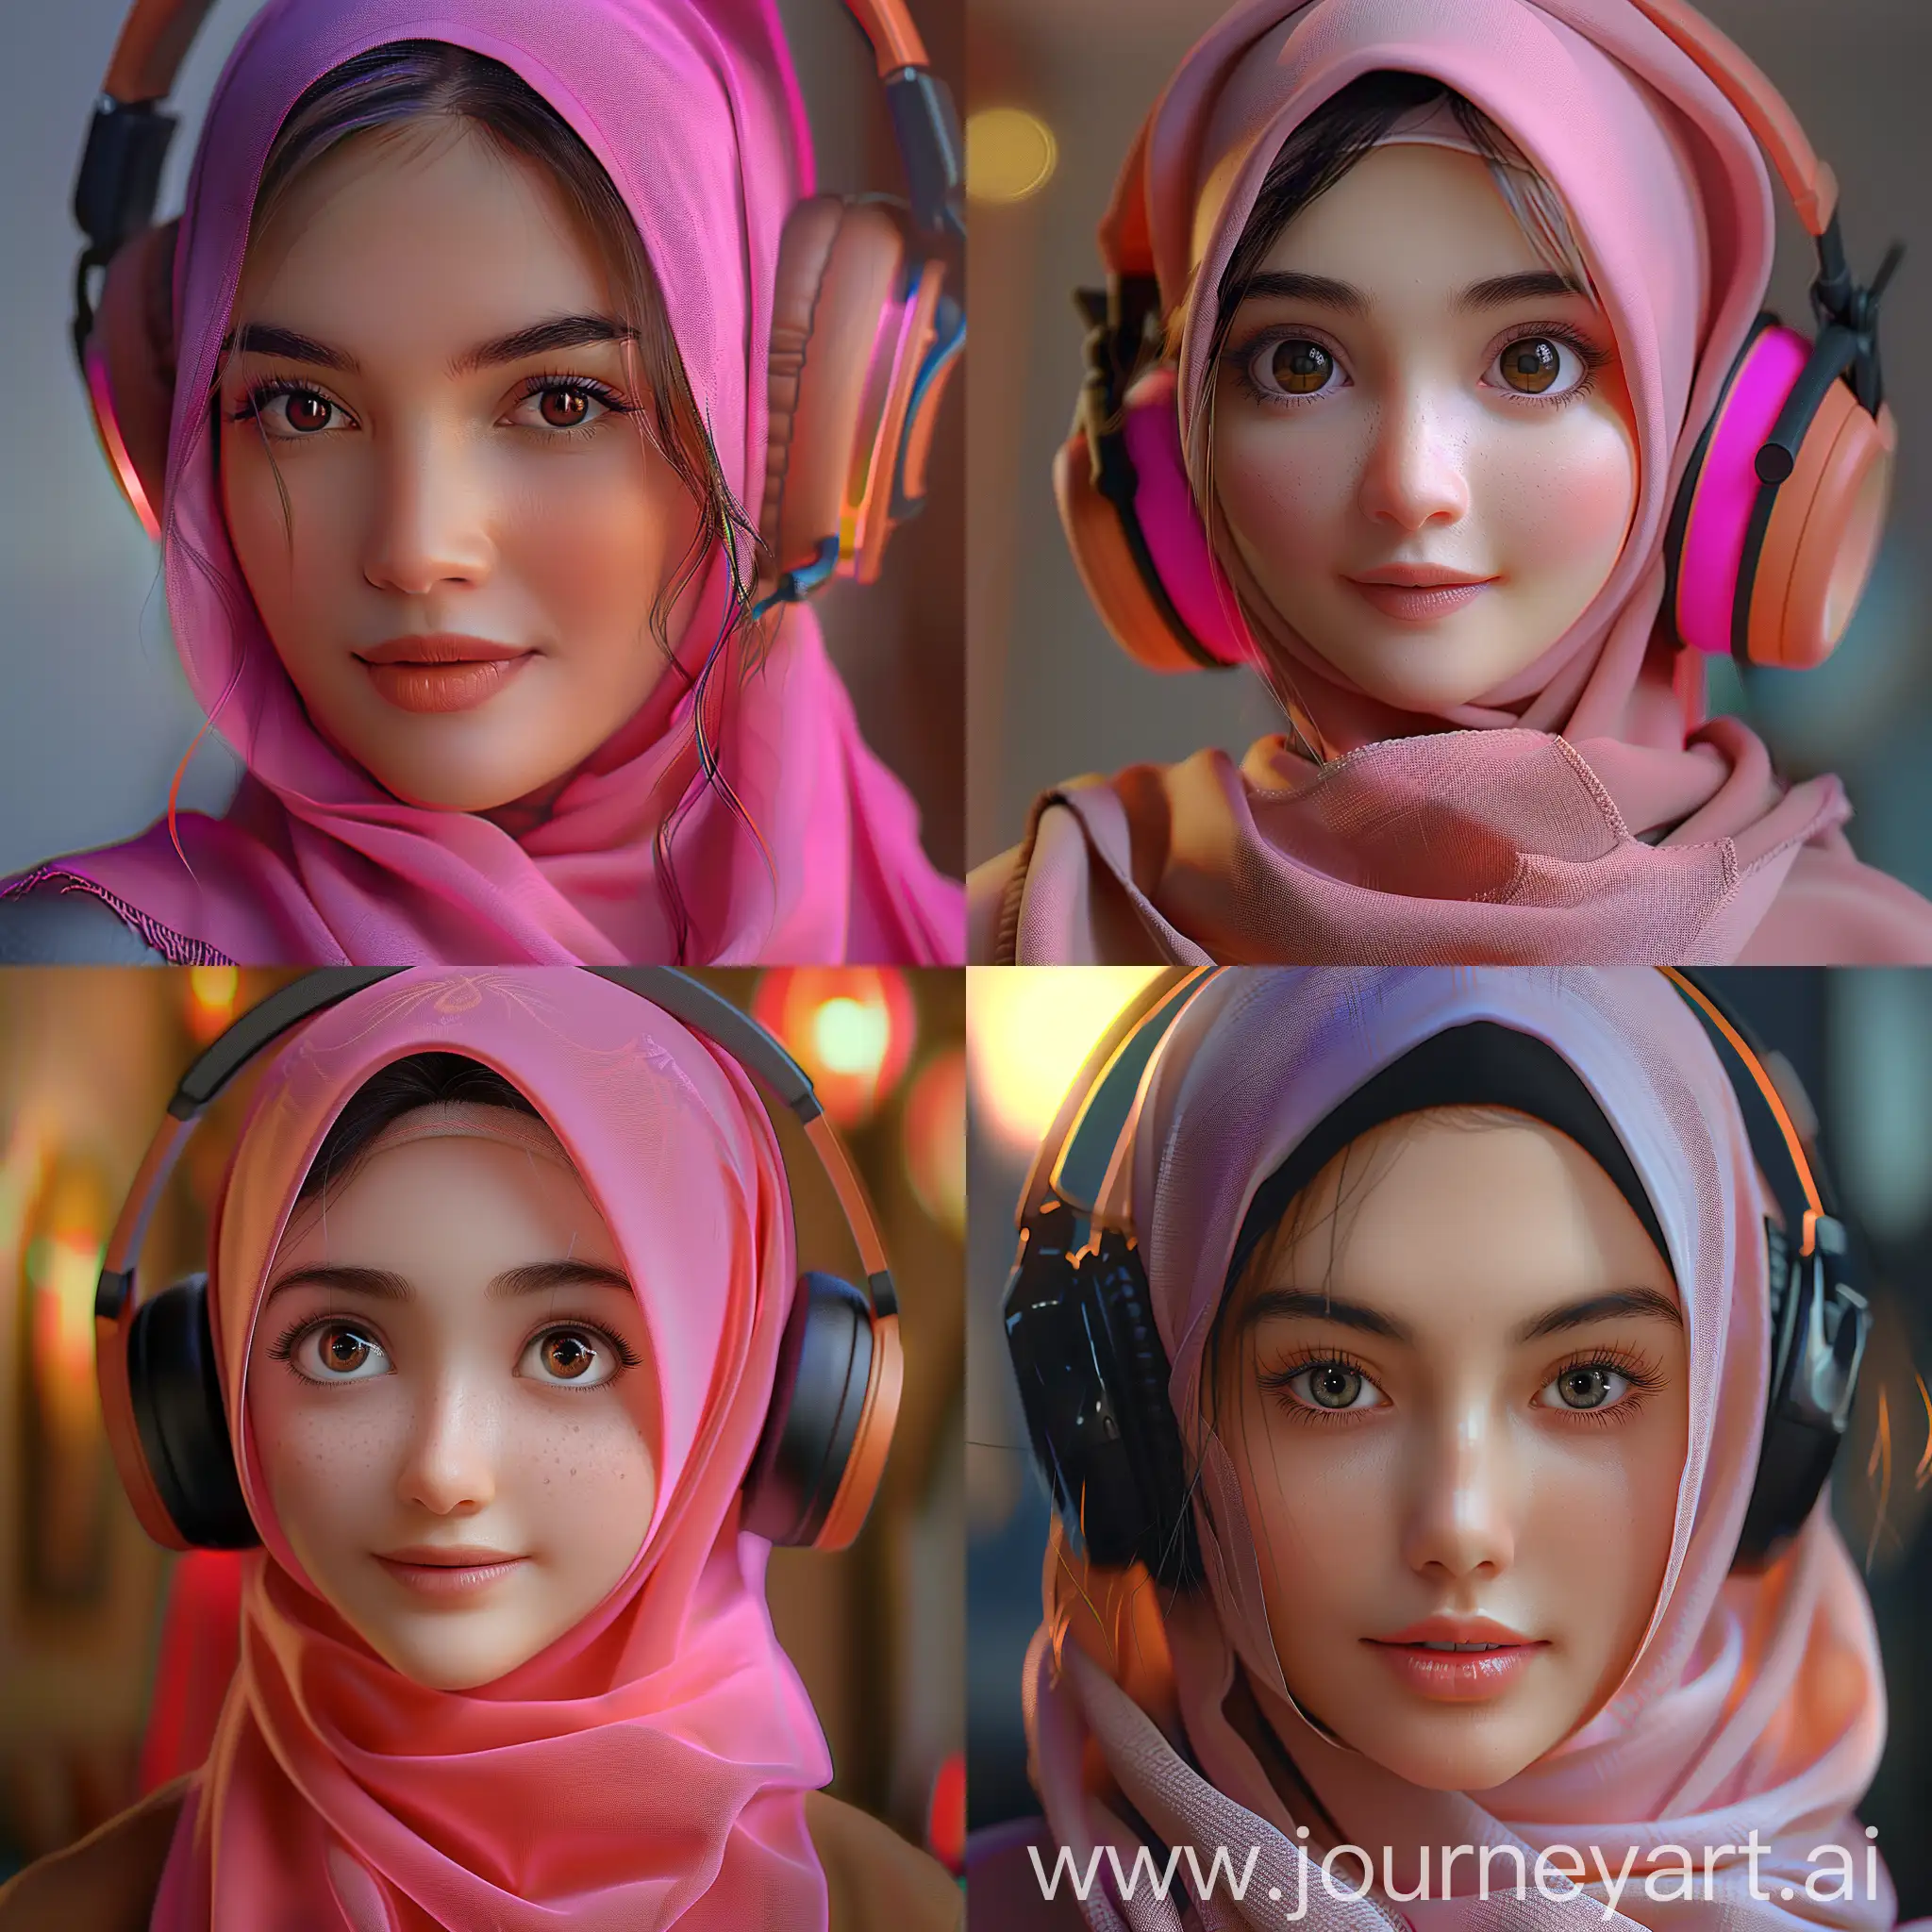 Smiling-Woman-in-Pink-Hijab-Disney-Pixar-Style-Portrait-in-Hyper-Realistic-8K-Resolution